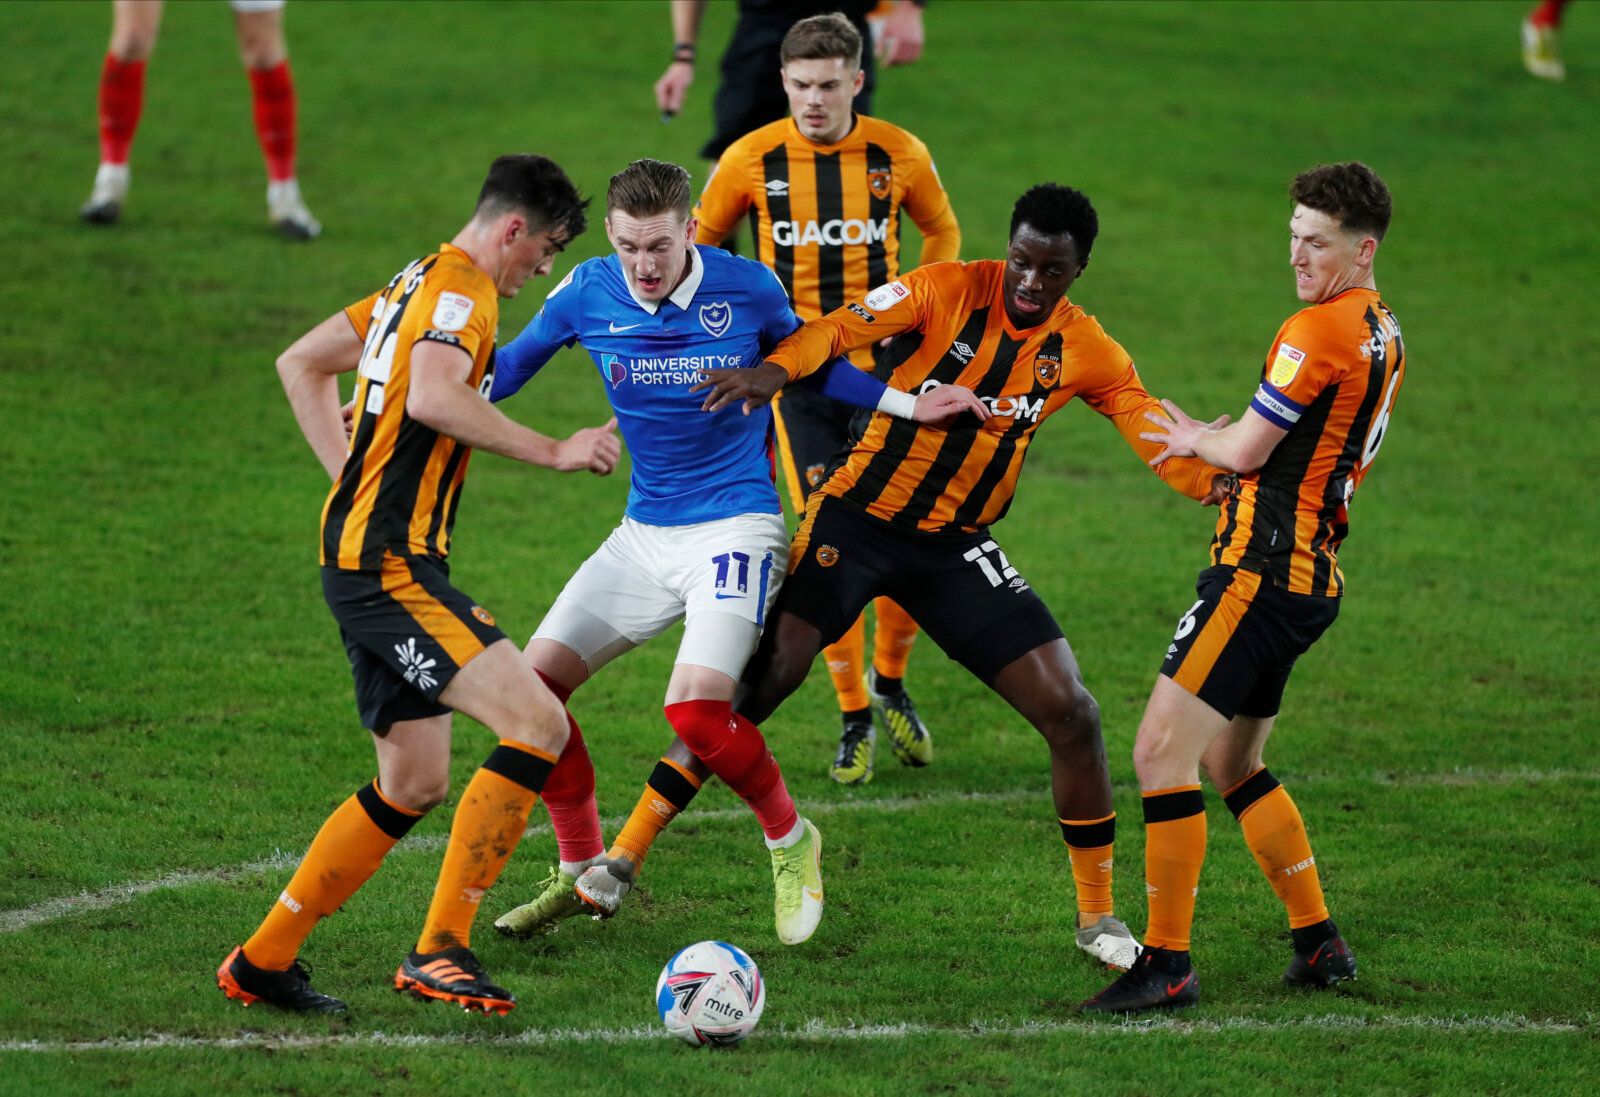 Soccer Football - League One - Hull City v Portsmouth- KCOM Stadium, Hull, Britain - December 18, 2020  Portsmouth's Ronan Curtis in action with Hull City's Richard Smallwood, Joshua Emmanuel and Jacob Greaves   Action Images/Lee Smith  EDITORIAL USE ONLY. No use with unauthorized audio, video, data, fixture lists, club/league logos or 